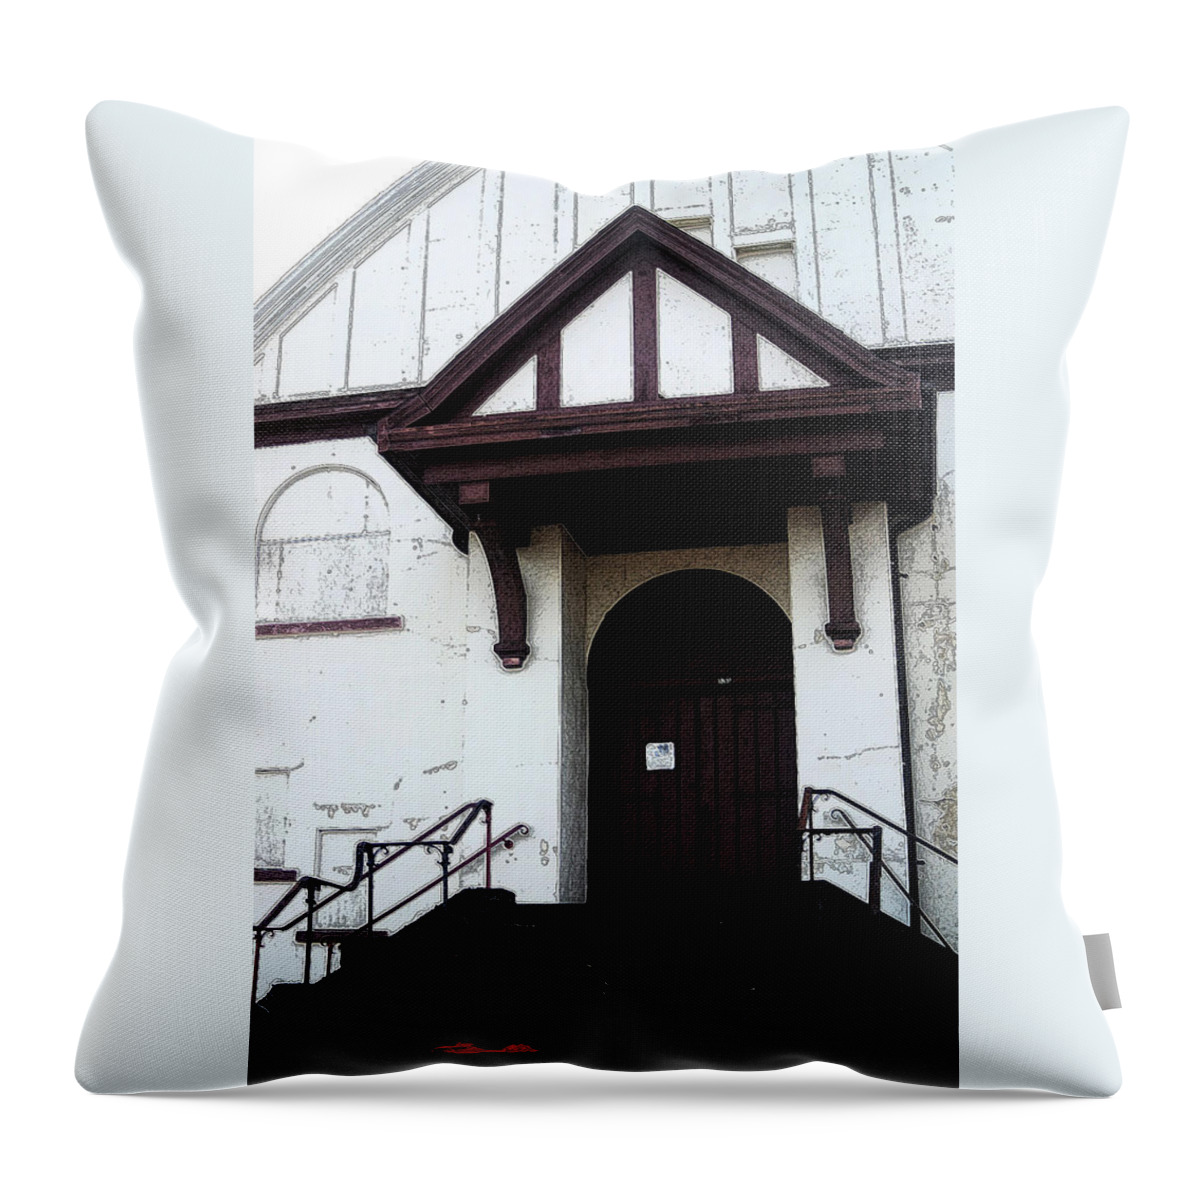  Throw Pillow featuring the photograph Red Scarf by Melissa Newcomb